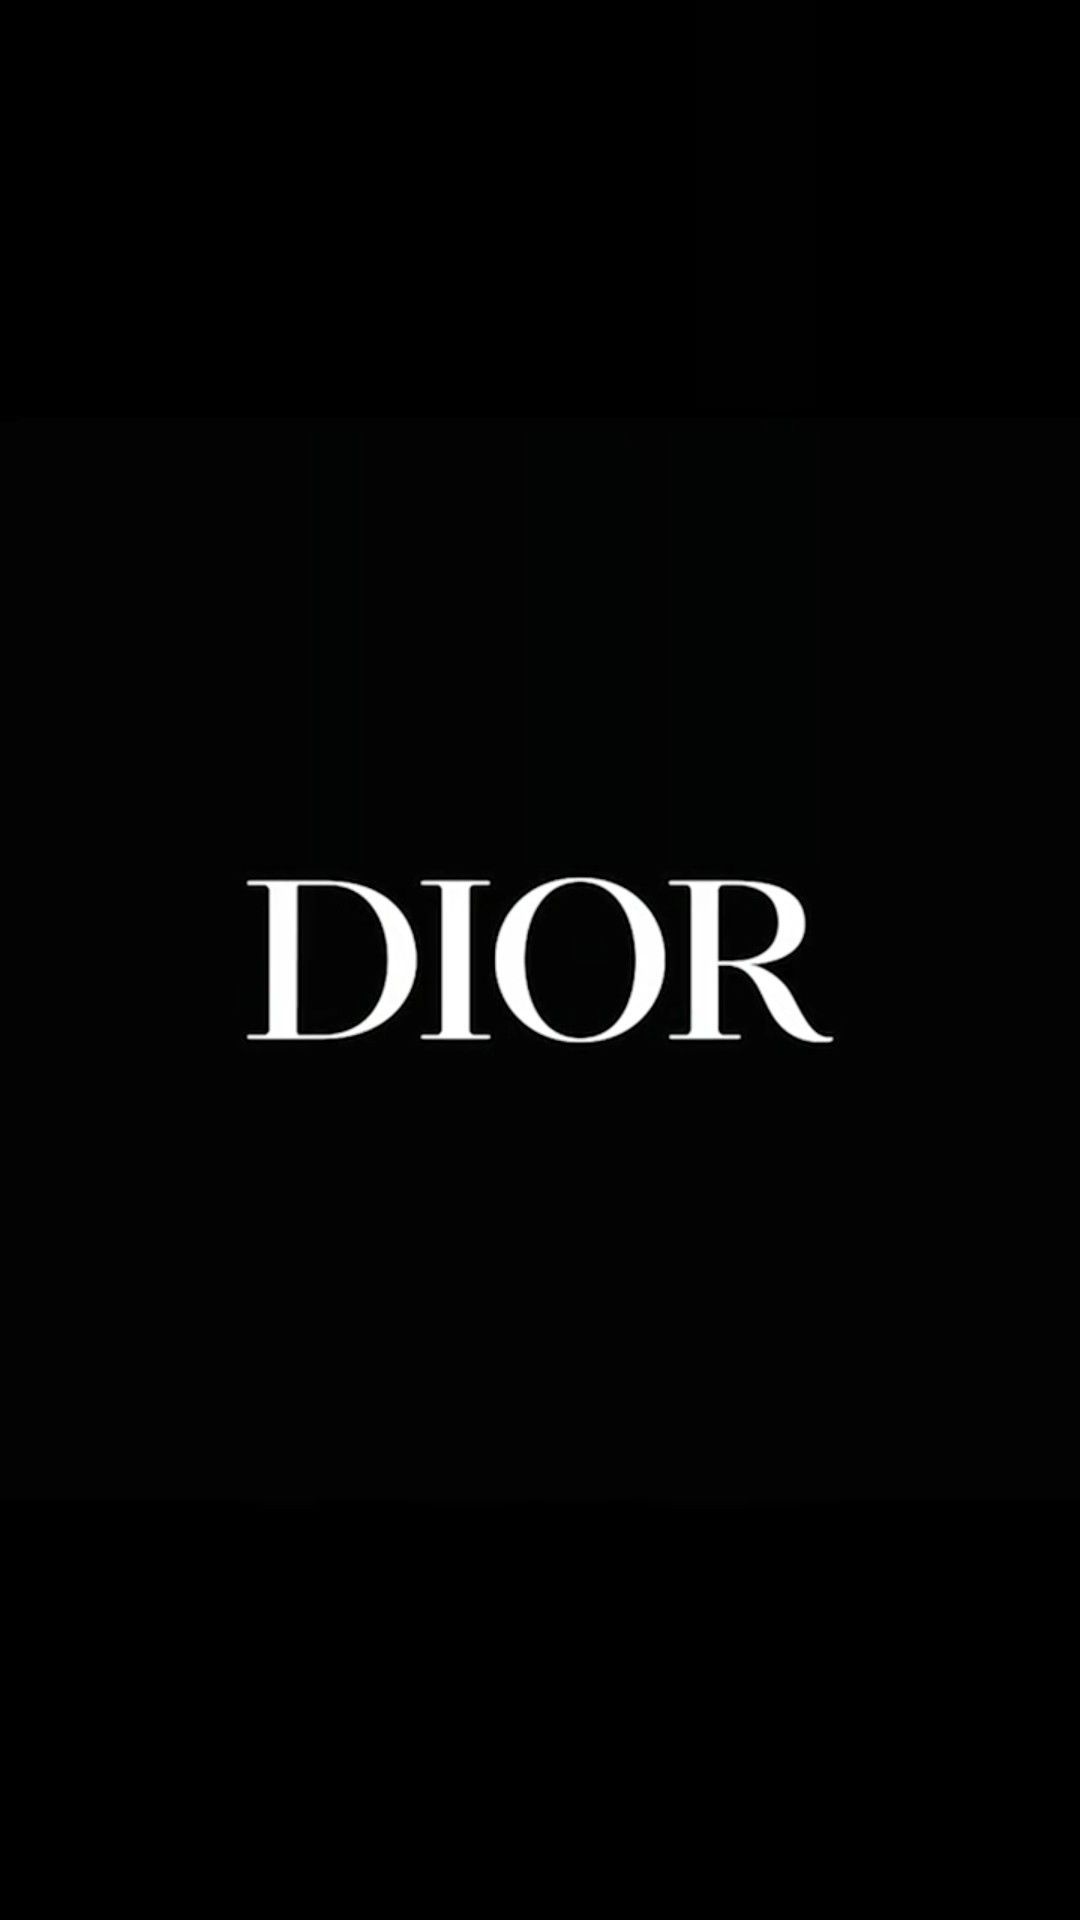 ❁ Dior Wallpaper ❁. Dior wallpaper, Classy wallpaper, Black and white photo wall